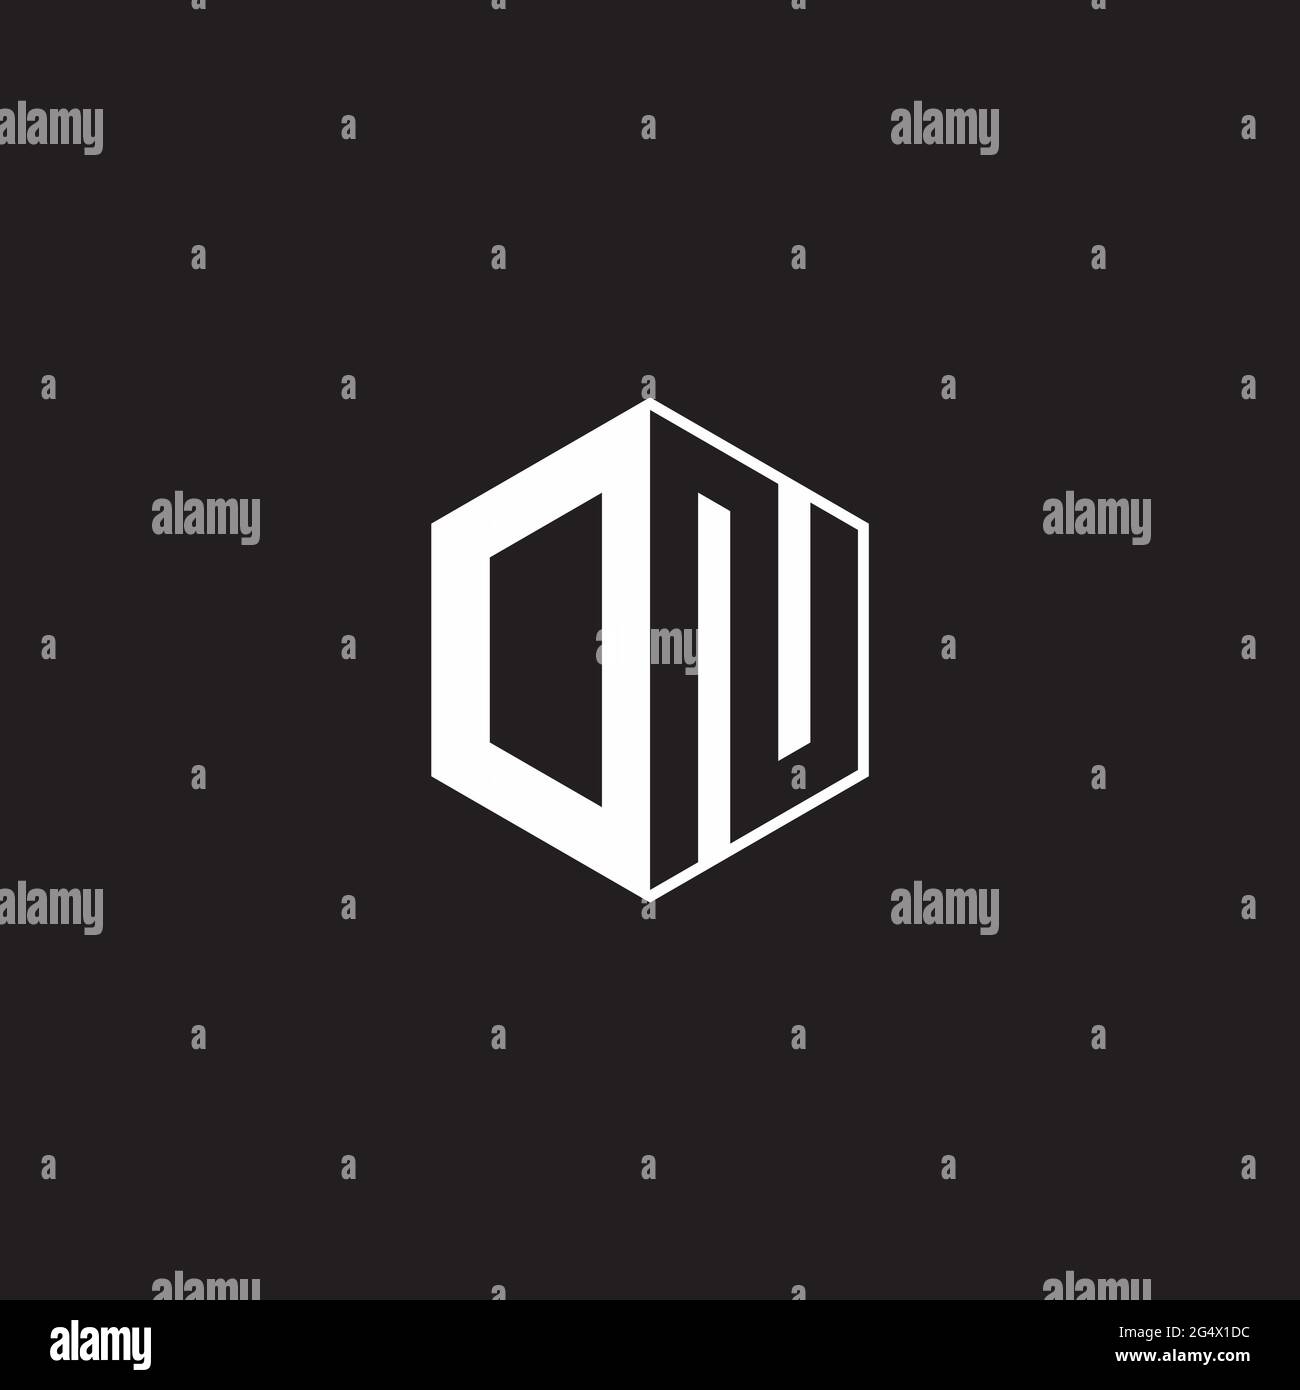 DN ND ON Logo monogram hexagon with black background negative space style Stock Vector